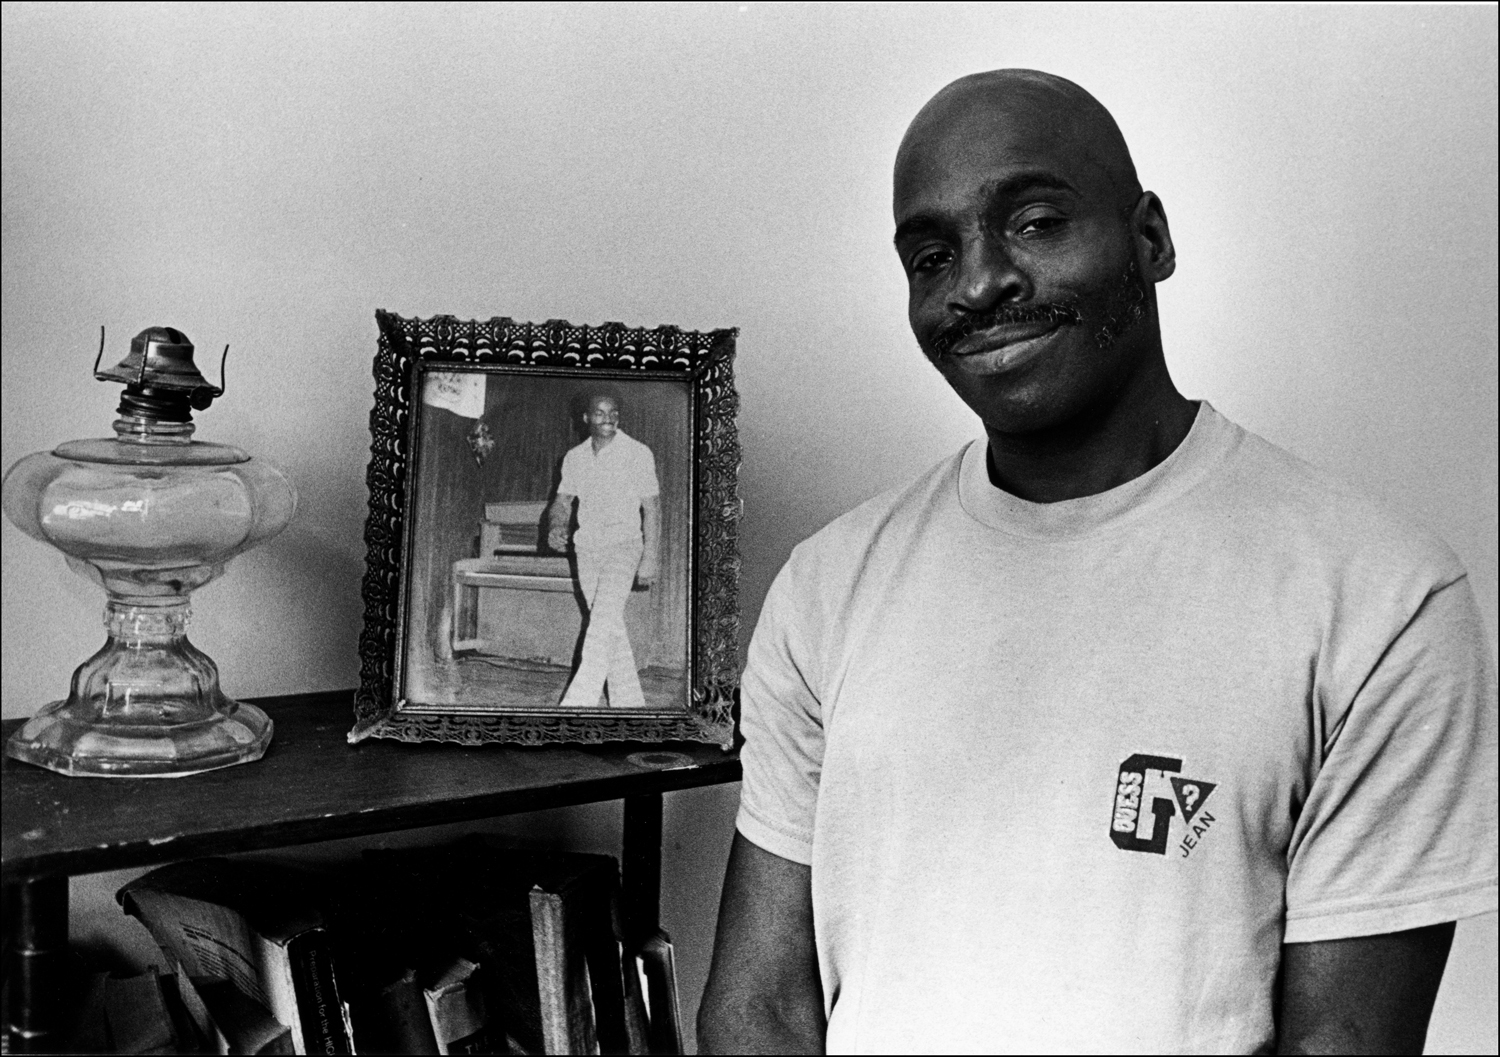 James in his renovated apartment, 1997. : Carmel Hill Harlem NYC 1995-2000 : BILL FOLEY 